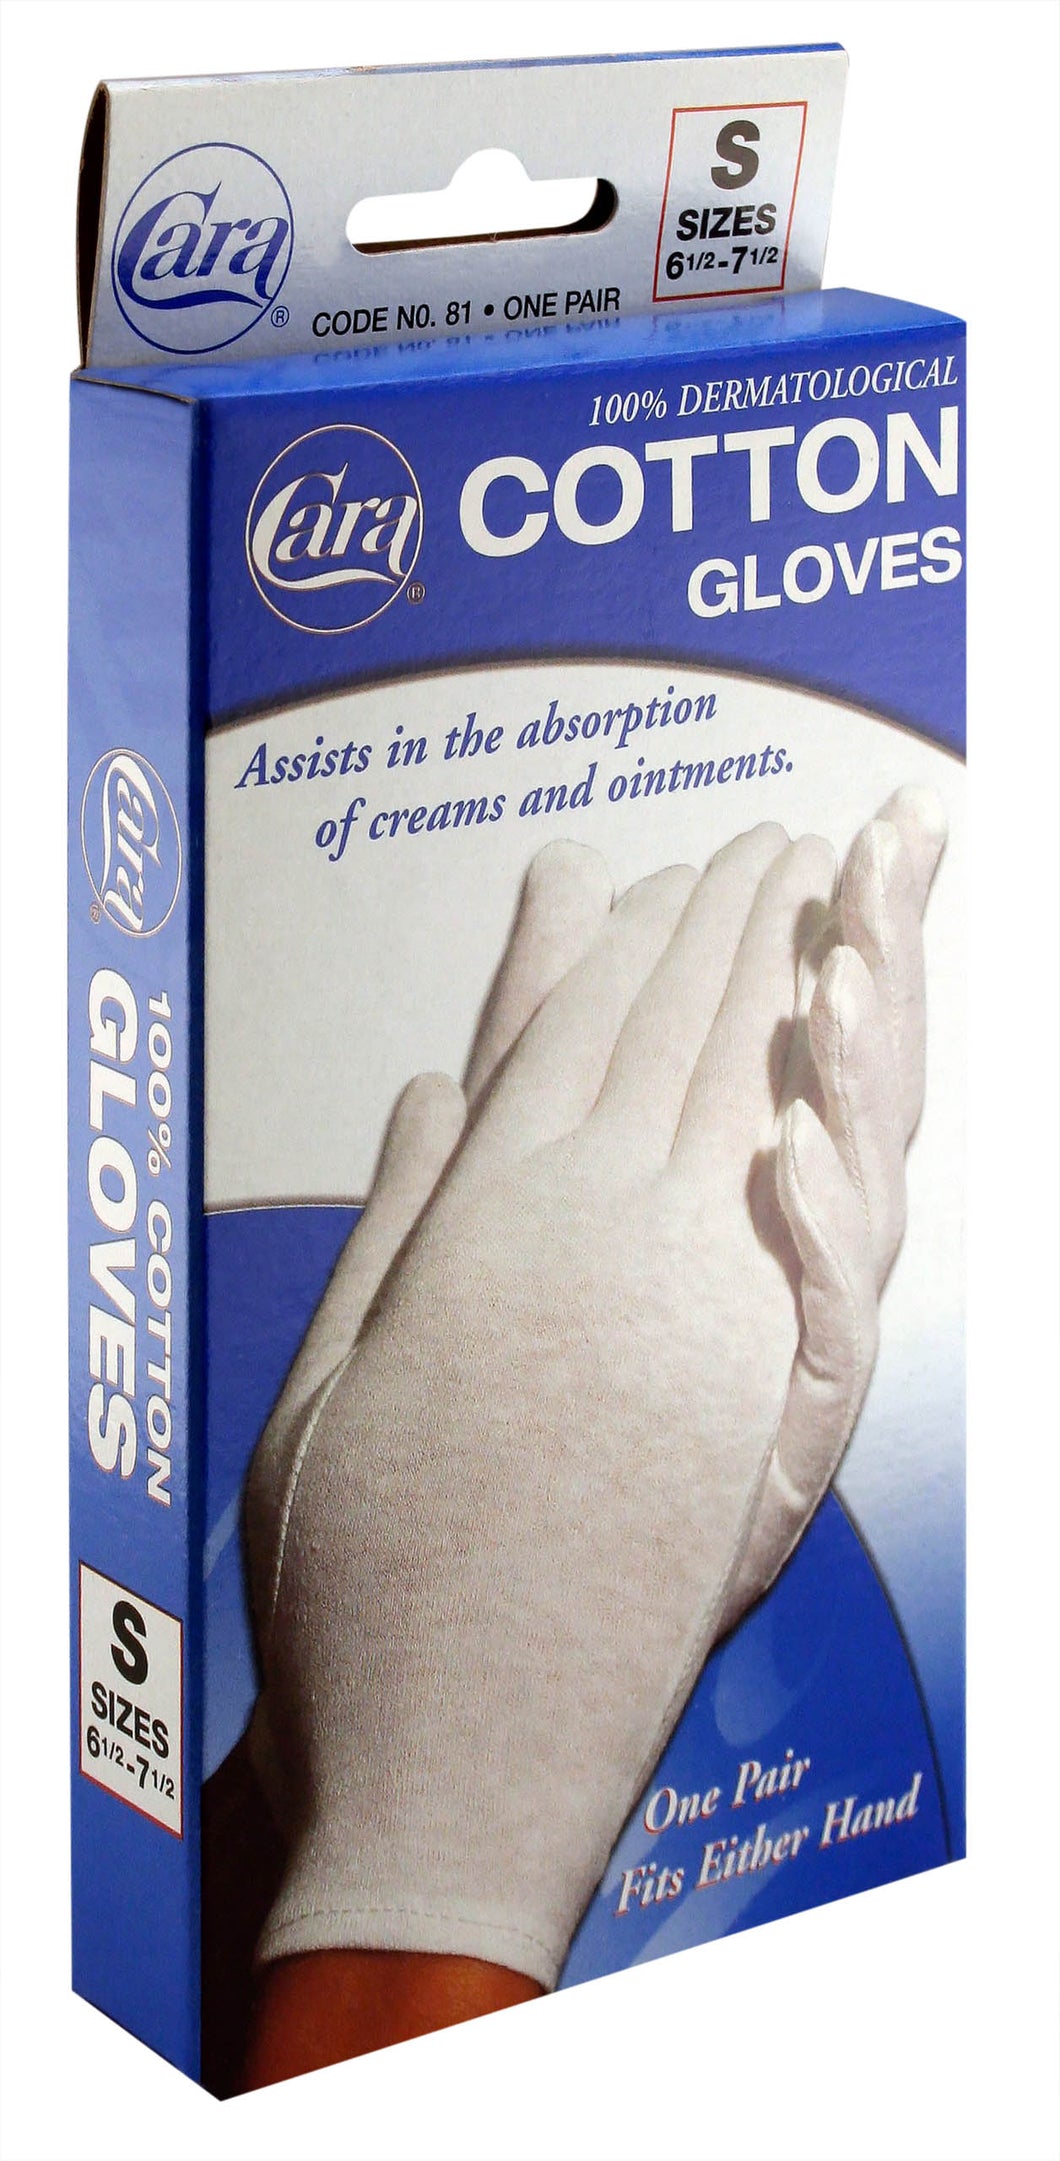 Model #81 - Dermatological Cotton Gloves, Small